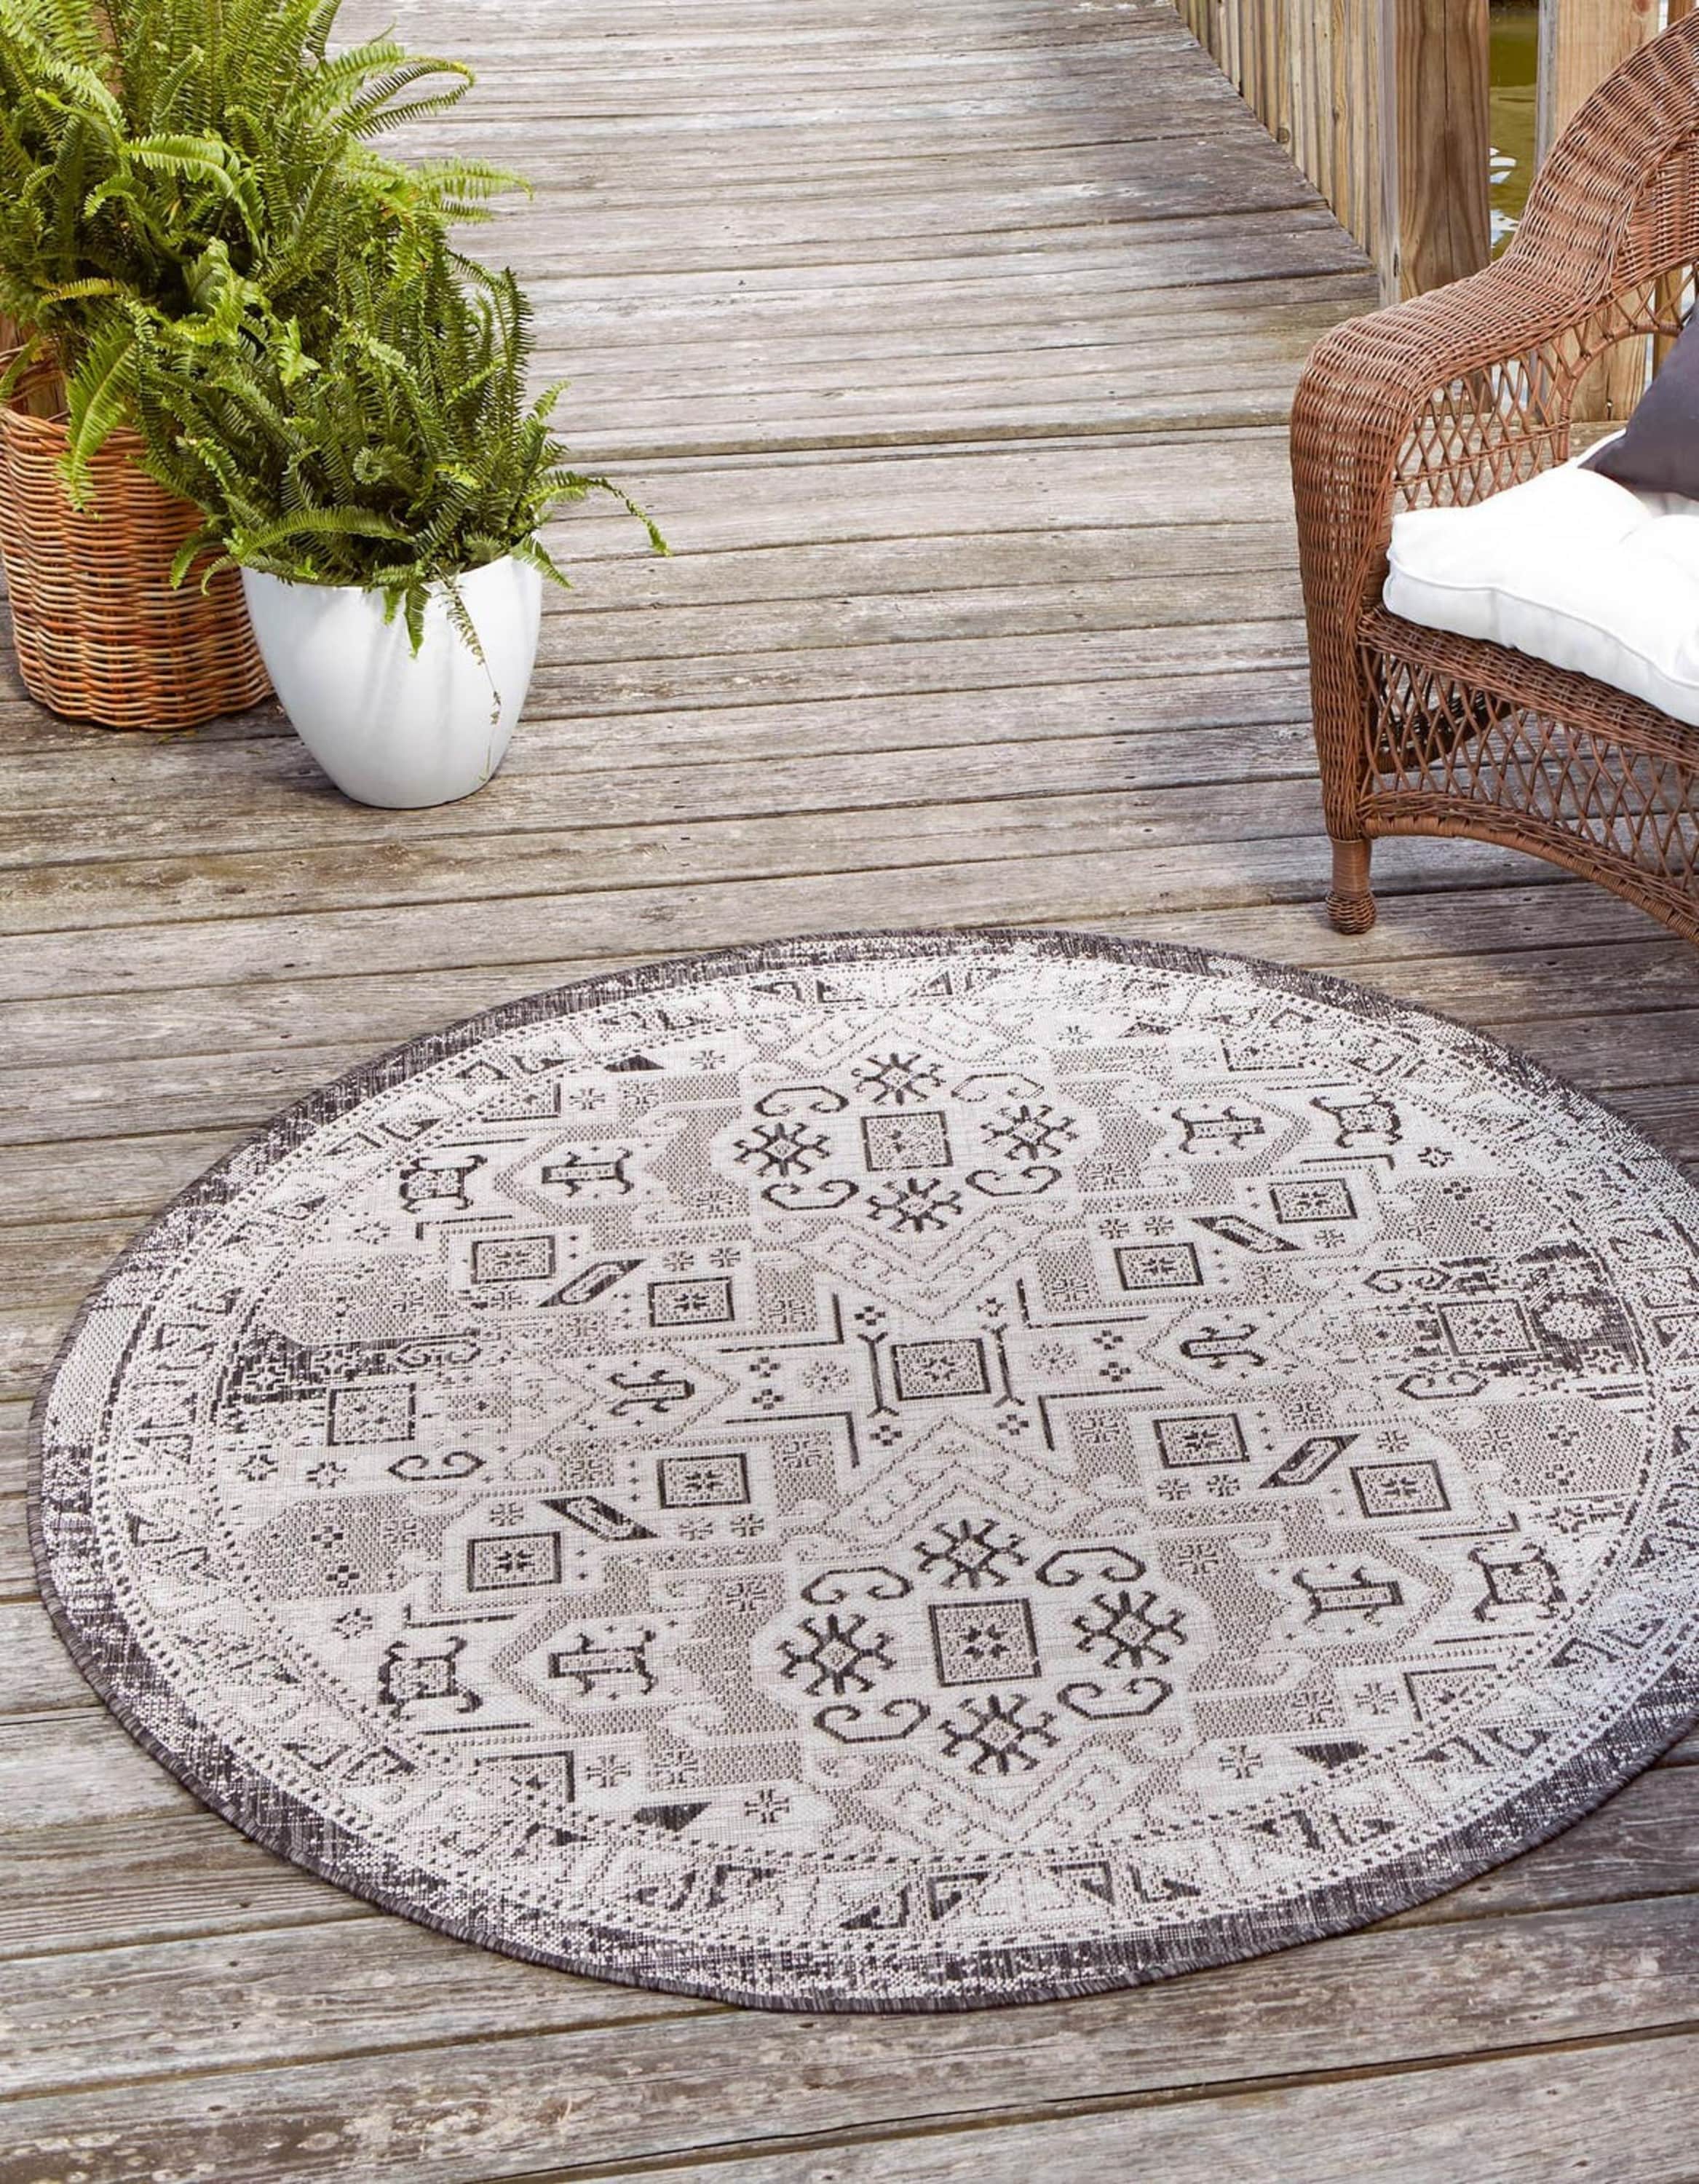 Unique Loom Outdoor Indoor/Outdoor Border Aztec Charcoal 3 X Rug Gray department in Area Round the Rugs at 3